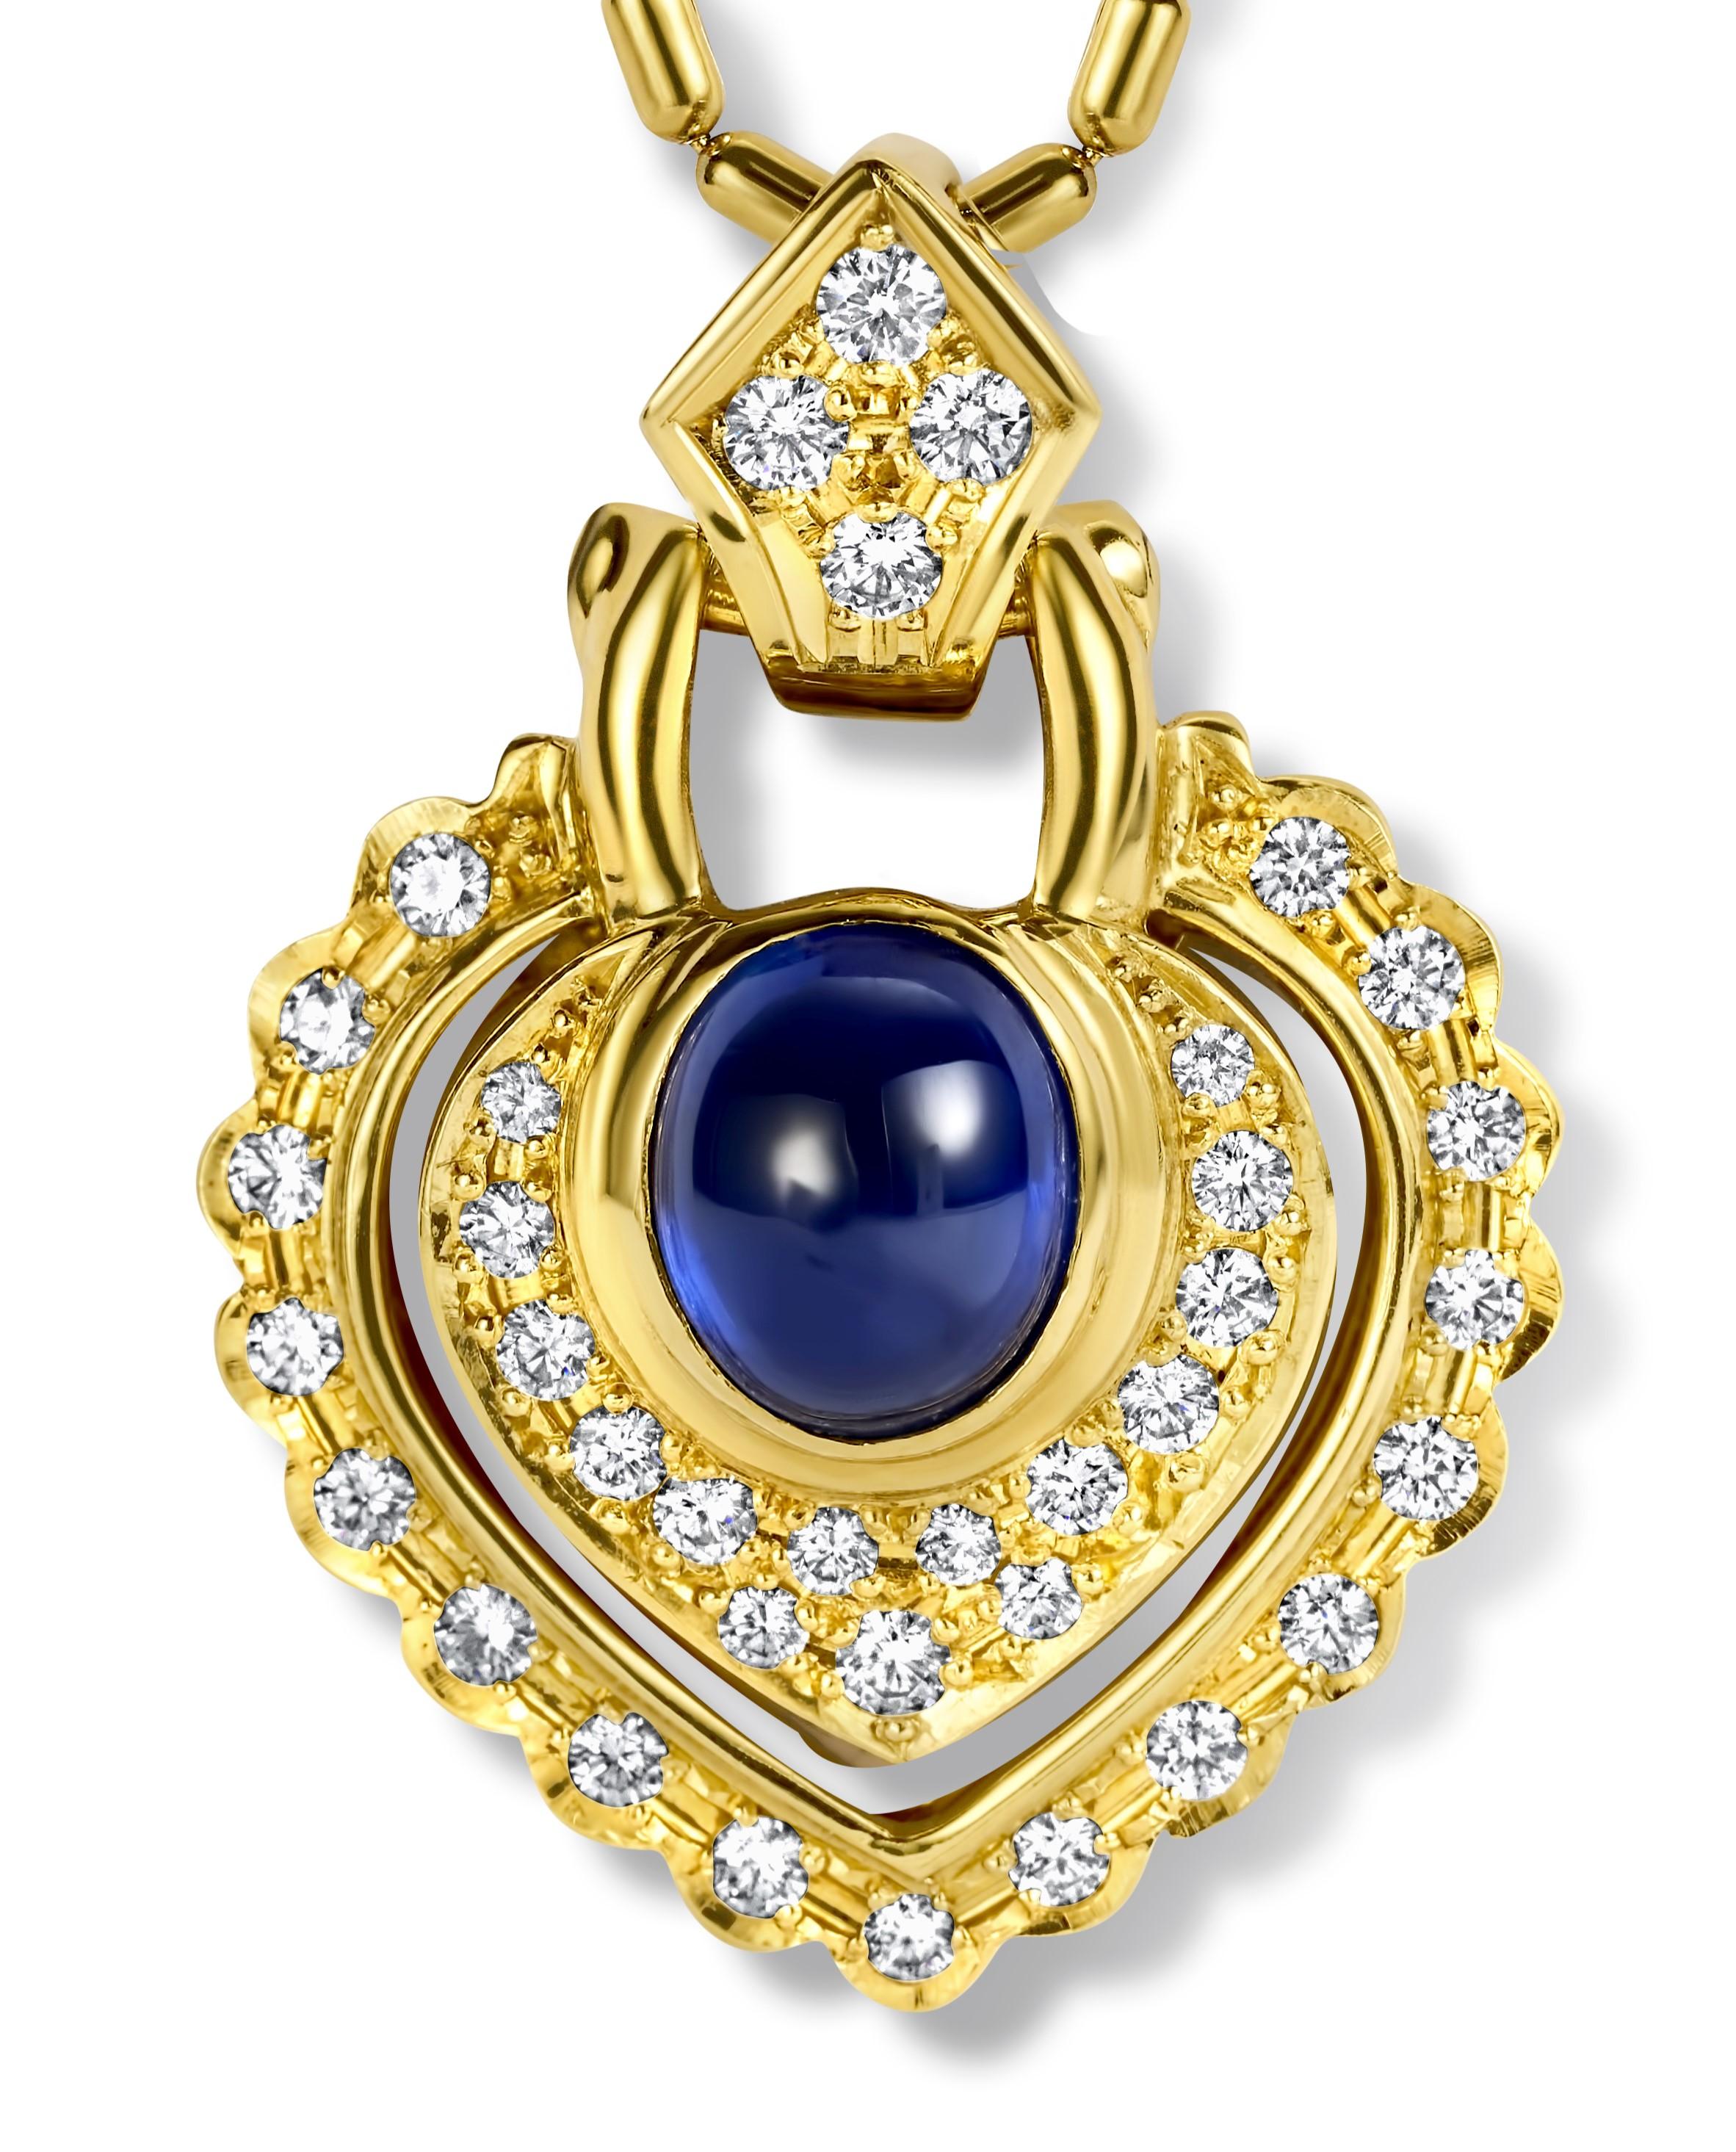 18kt. Yellow Gold Necklace, With Heart Shape Pendant and 2.89ct. Cabochon Sapphire with Beautiful Color & Diamonds 

Sapphire: Cabochon with amazing color  2.89 ct. 

Diamonds: brilliant cut diamonds together approx. 0.62 ct. 

Material: 18 kt.